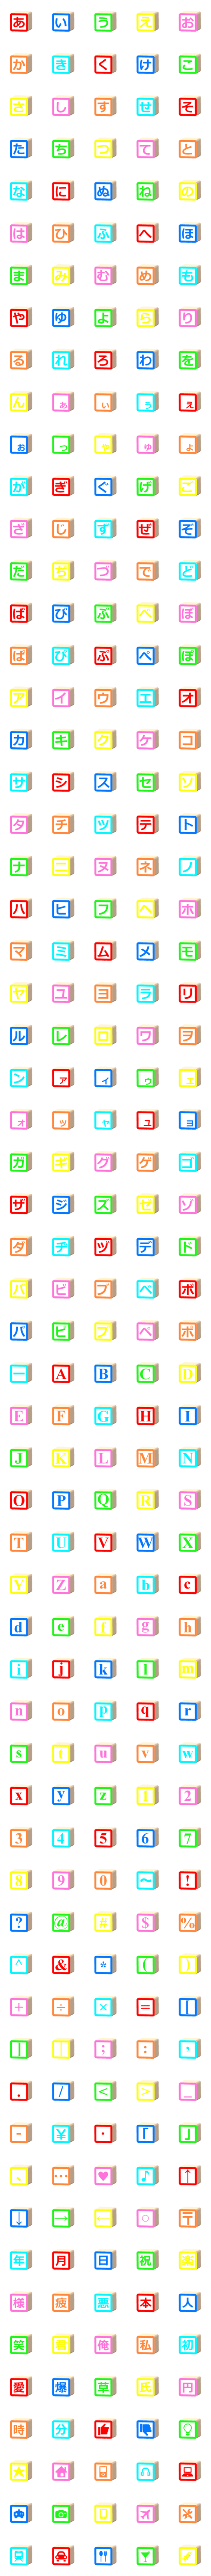 [LINE絵文字]♪可愛い♪トイブロックでストーリーをの画像一覧